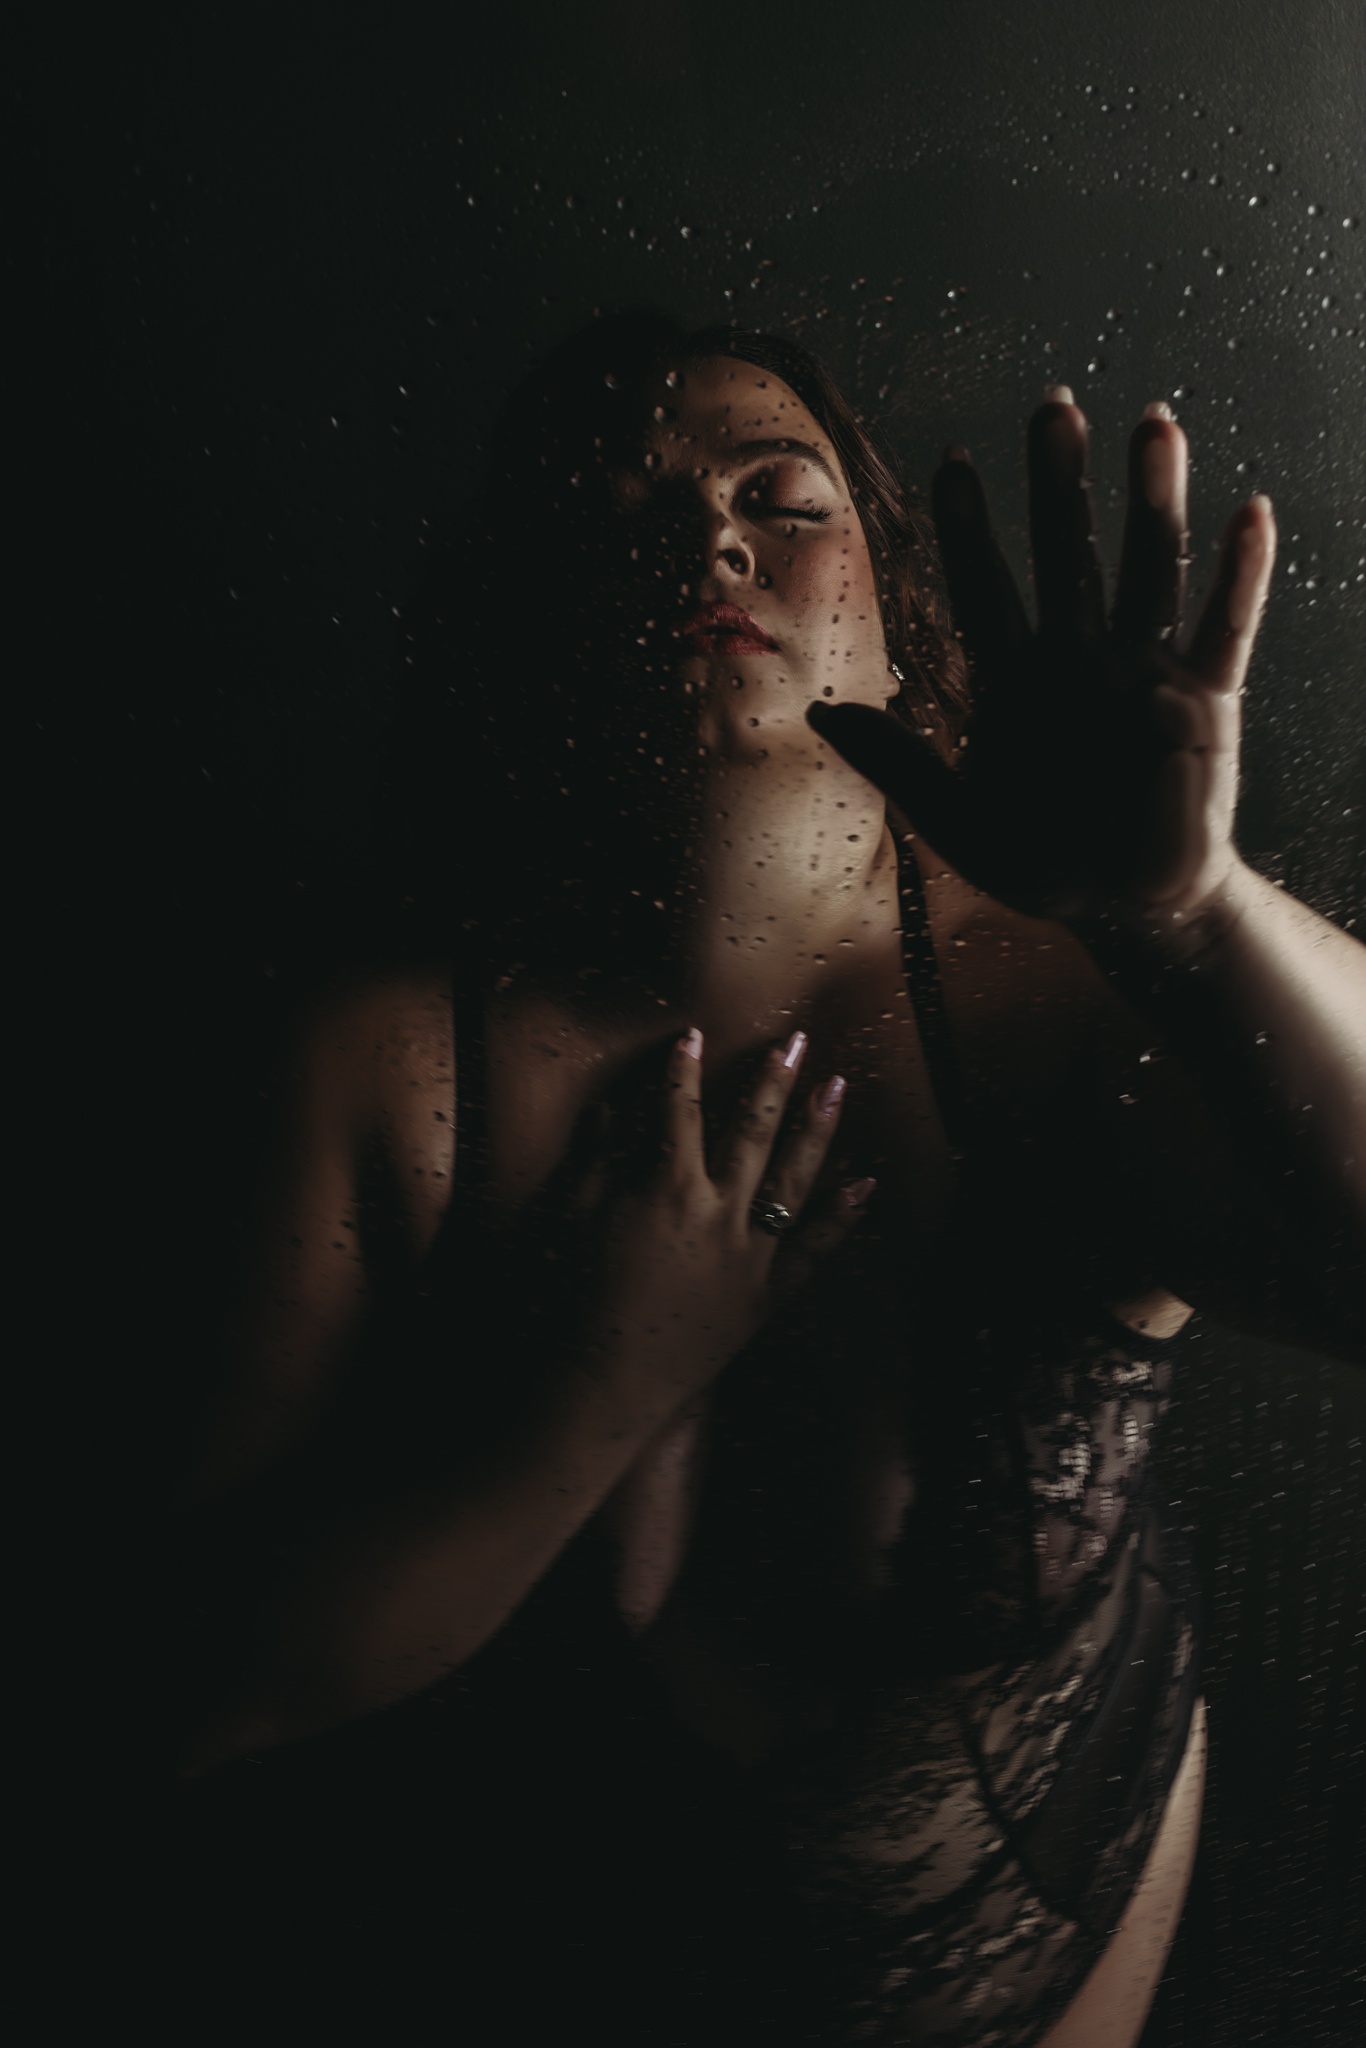 woman in shower with a hand on the glass